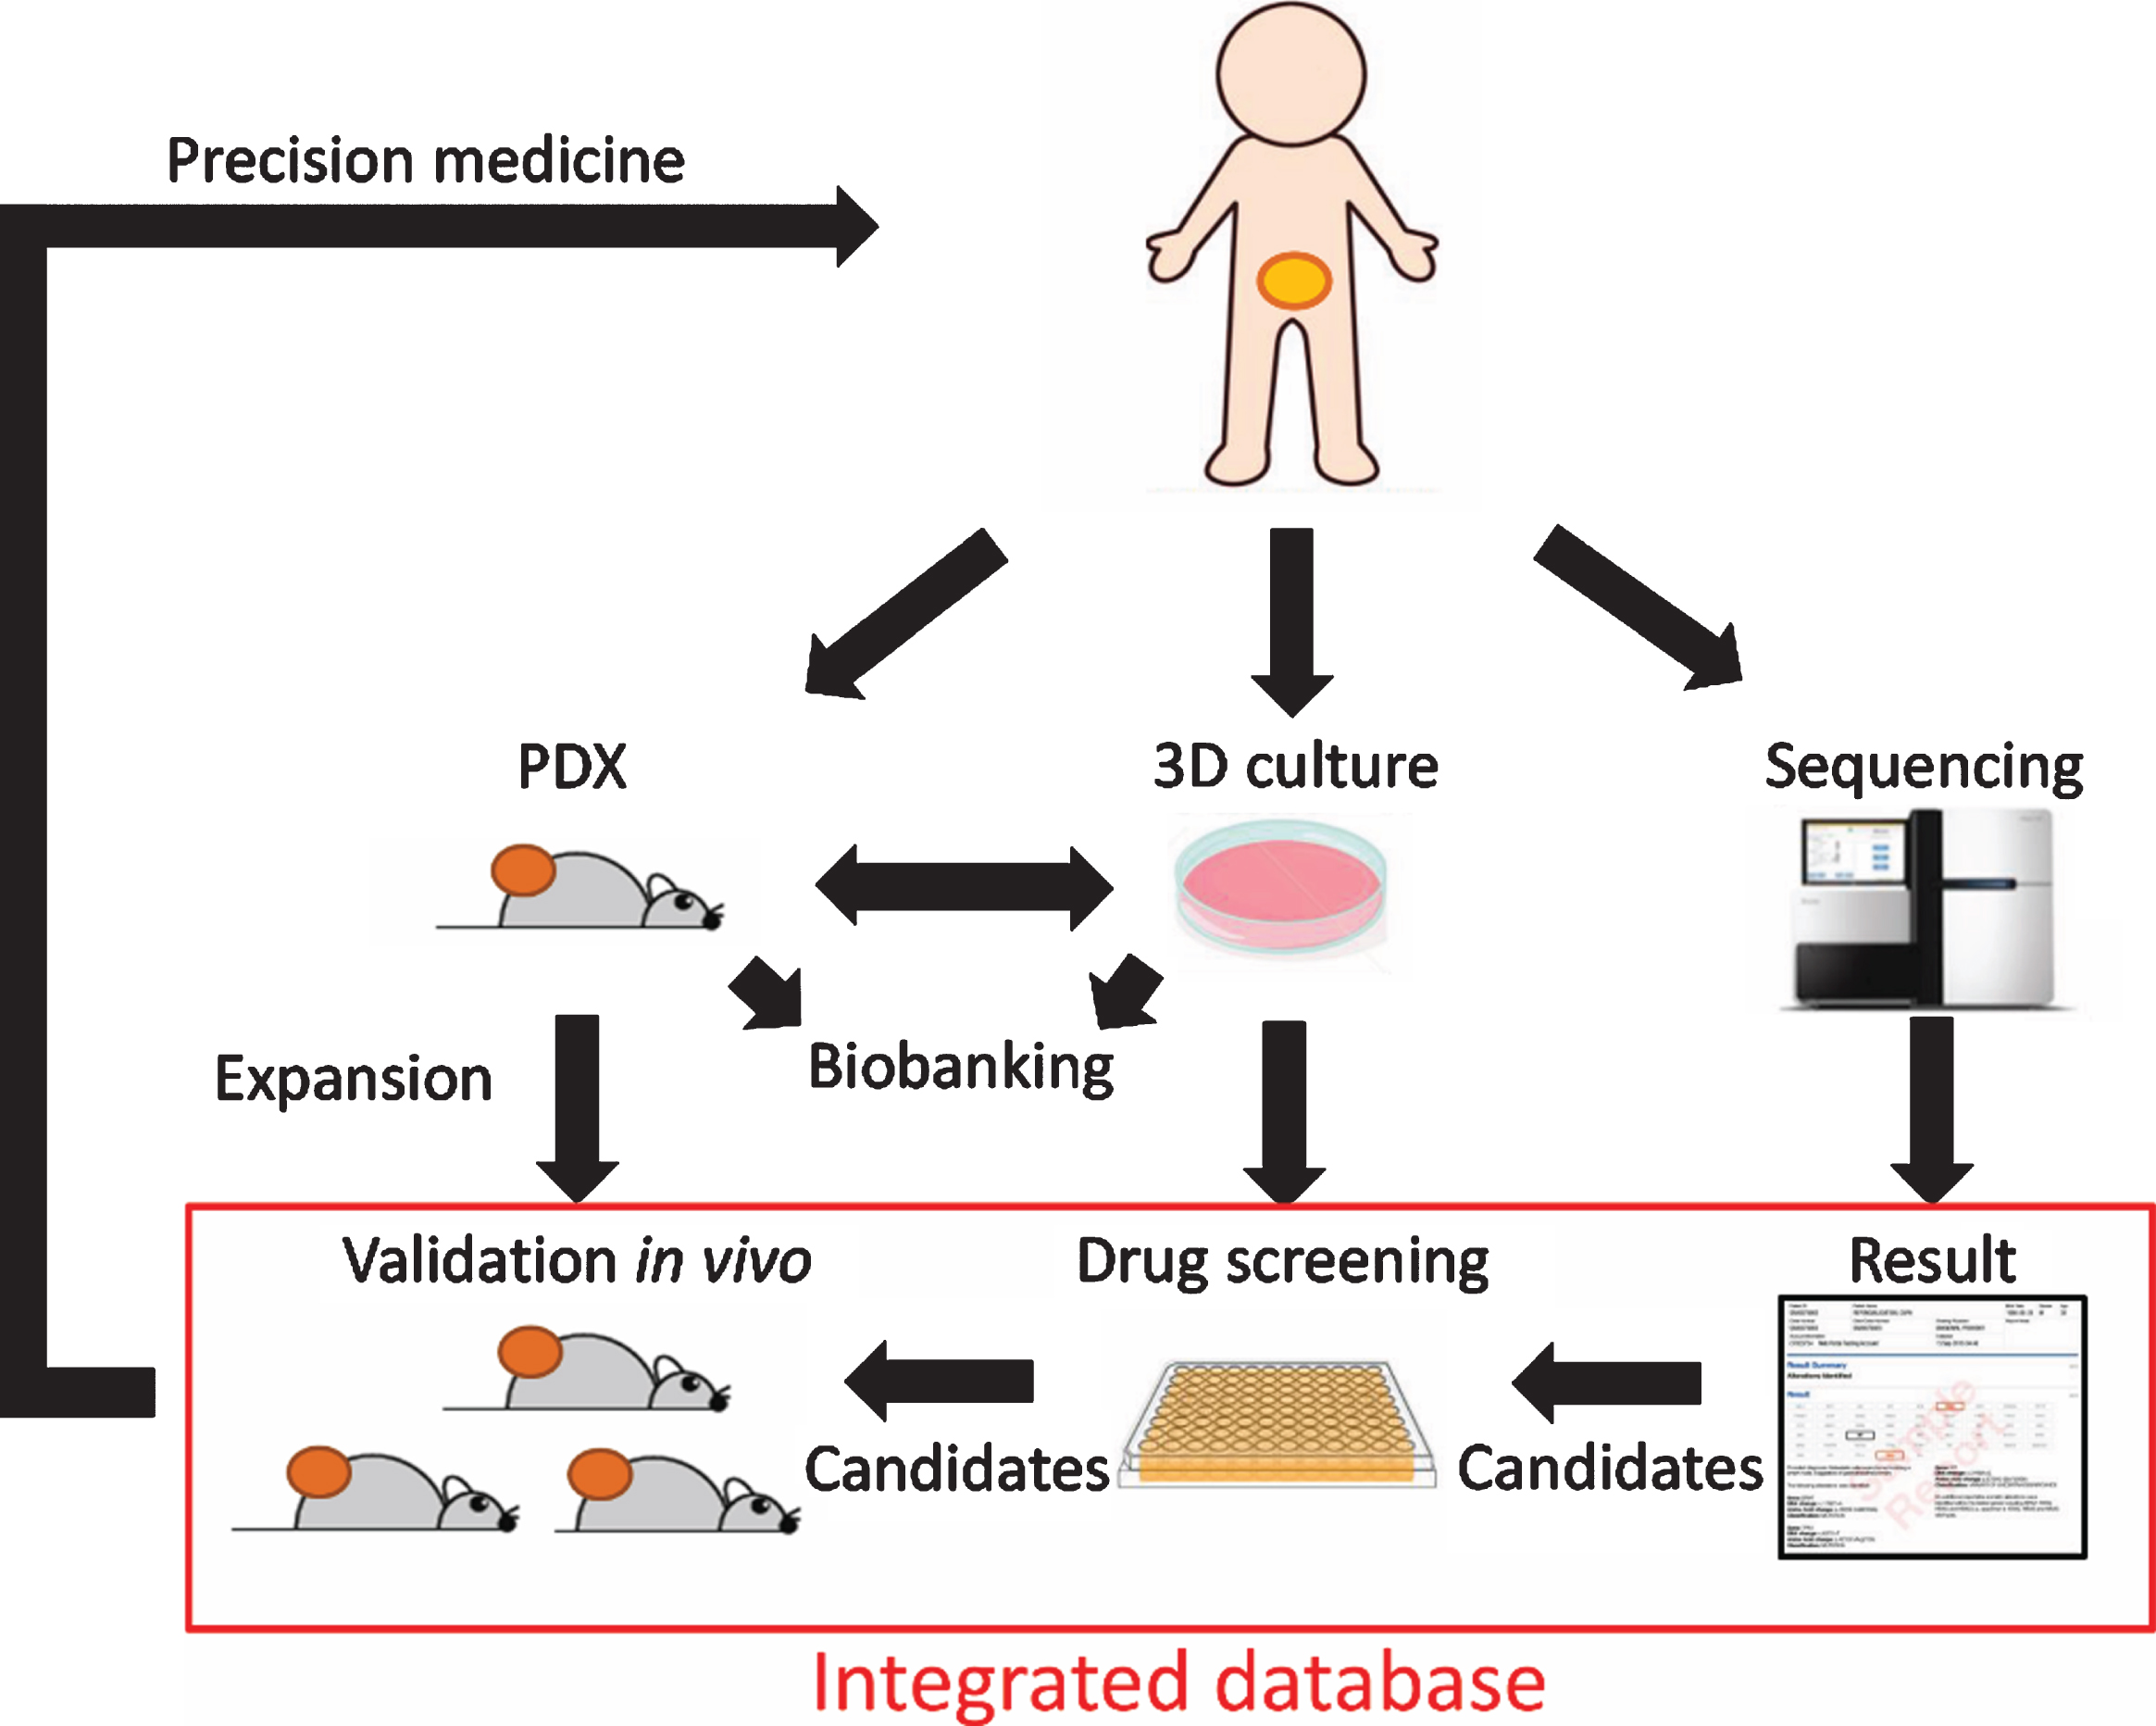 Schematic representation of combined operation of PDX and 3D culture for precision medicine.